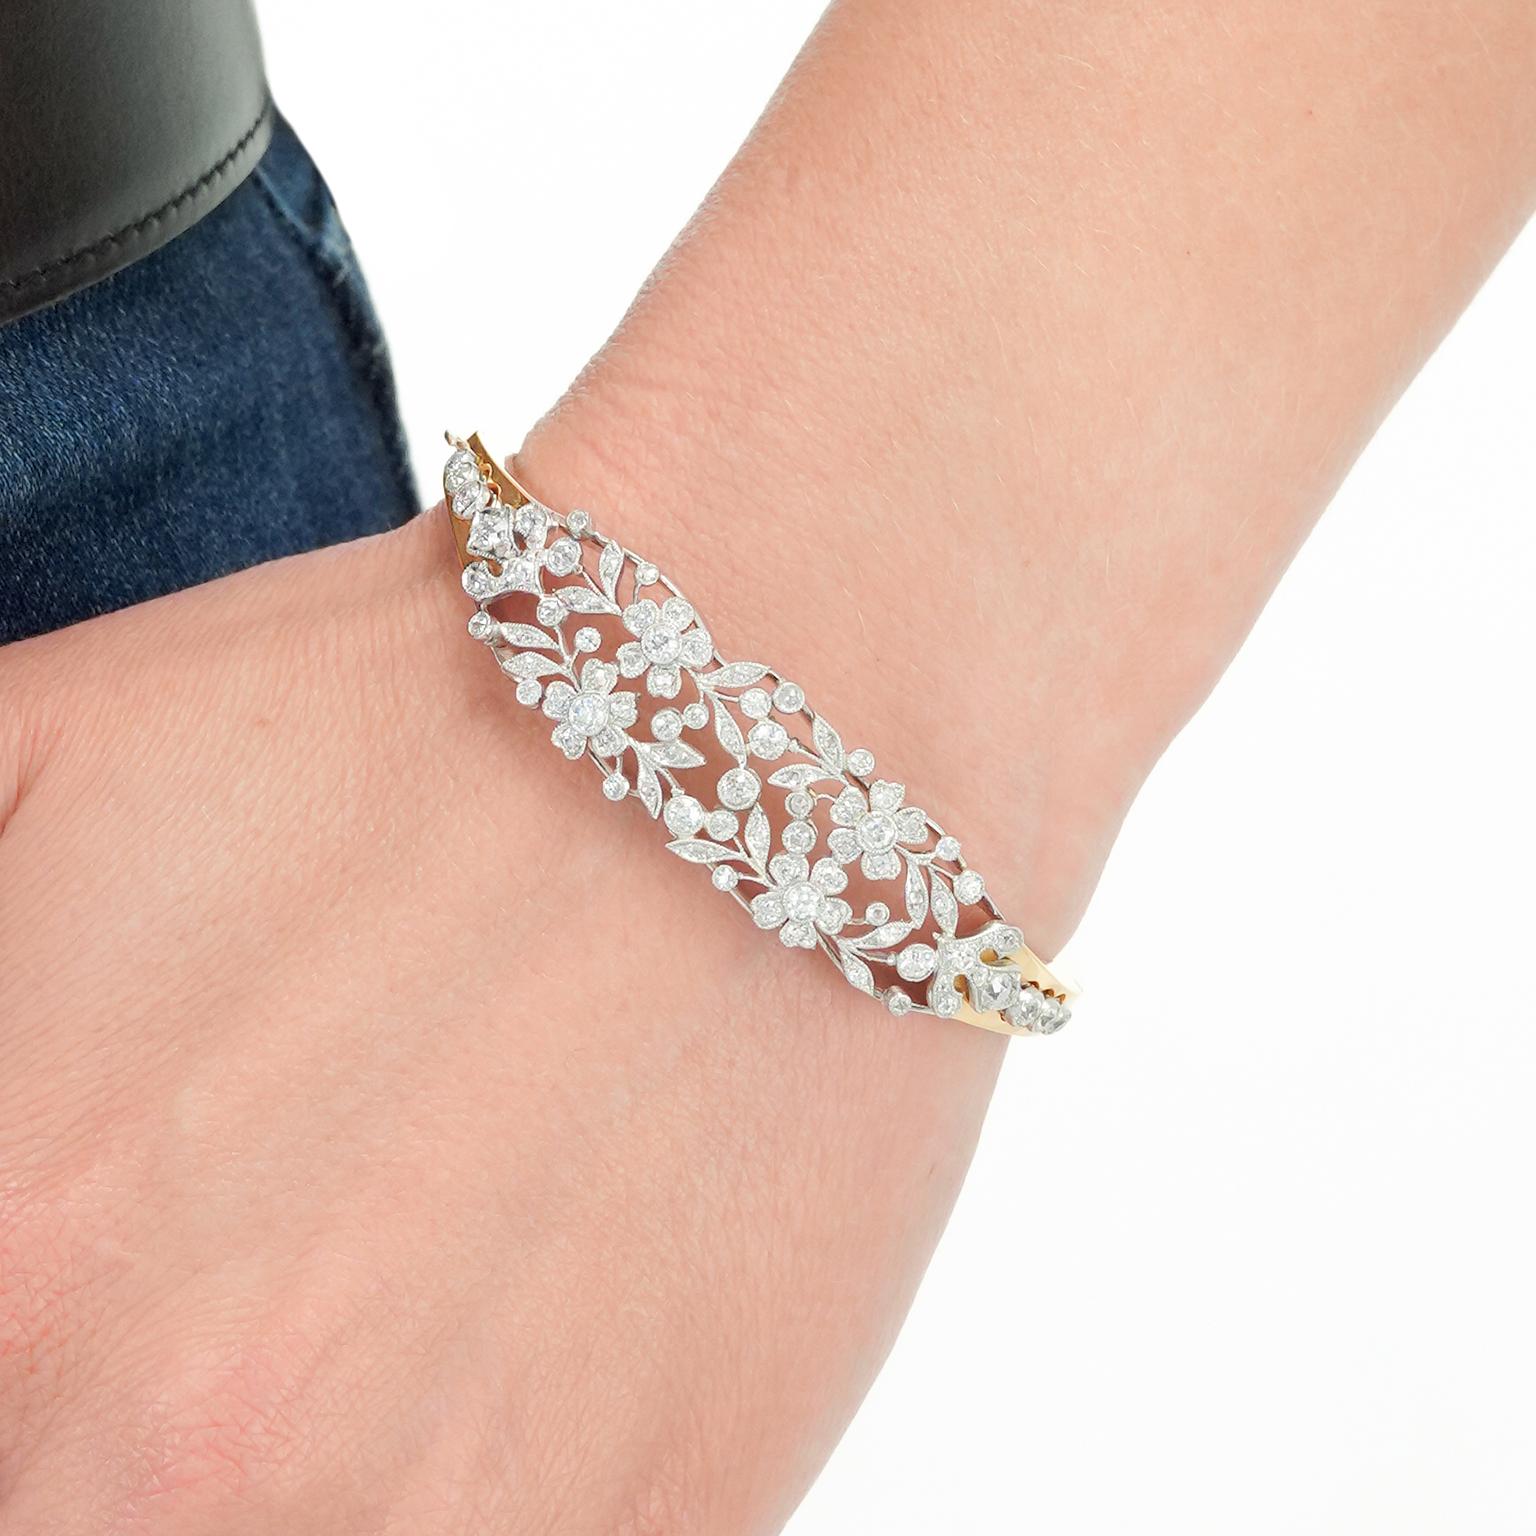 Circa 1950s/1900s, Platinum and 14k, American. This cheerful floral bracelet is gorgeous. Edwardian platinum and diamond flowers, leaves, twigs, and berries on top underscored by a heavy yellow gold bracelet. This stunning marriage has it all,